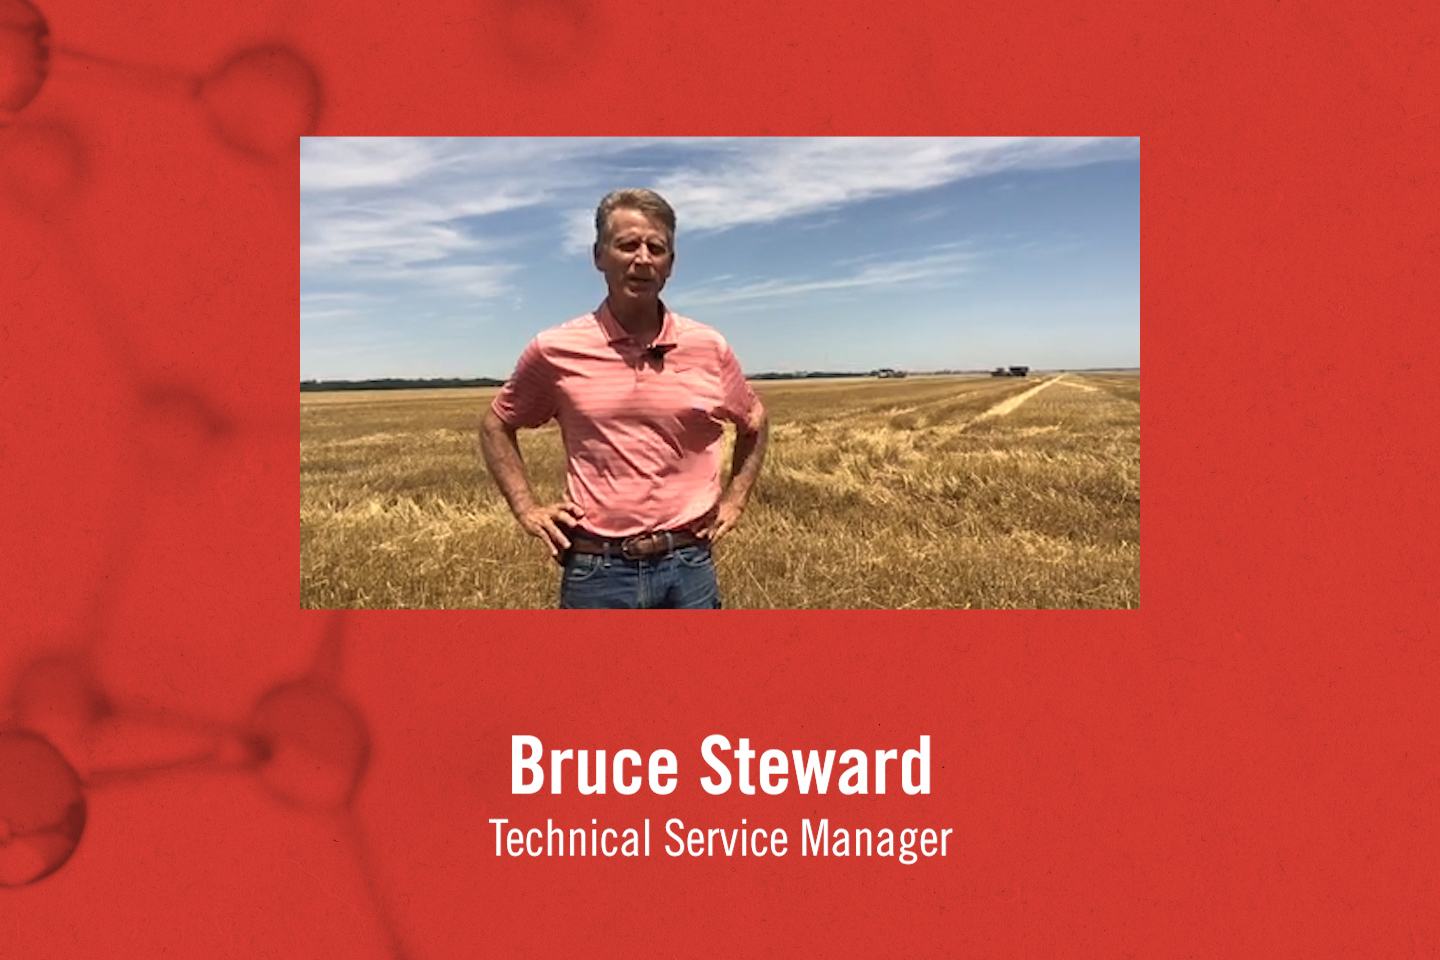 FMC Technical Service Manager Bruce Steward discusses the Topguard® fungicide “5 on 5” program aimed to help growers combat costly diseases and improved yields at harvest. 